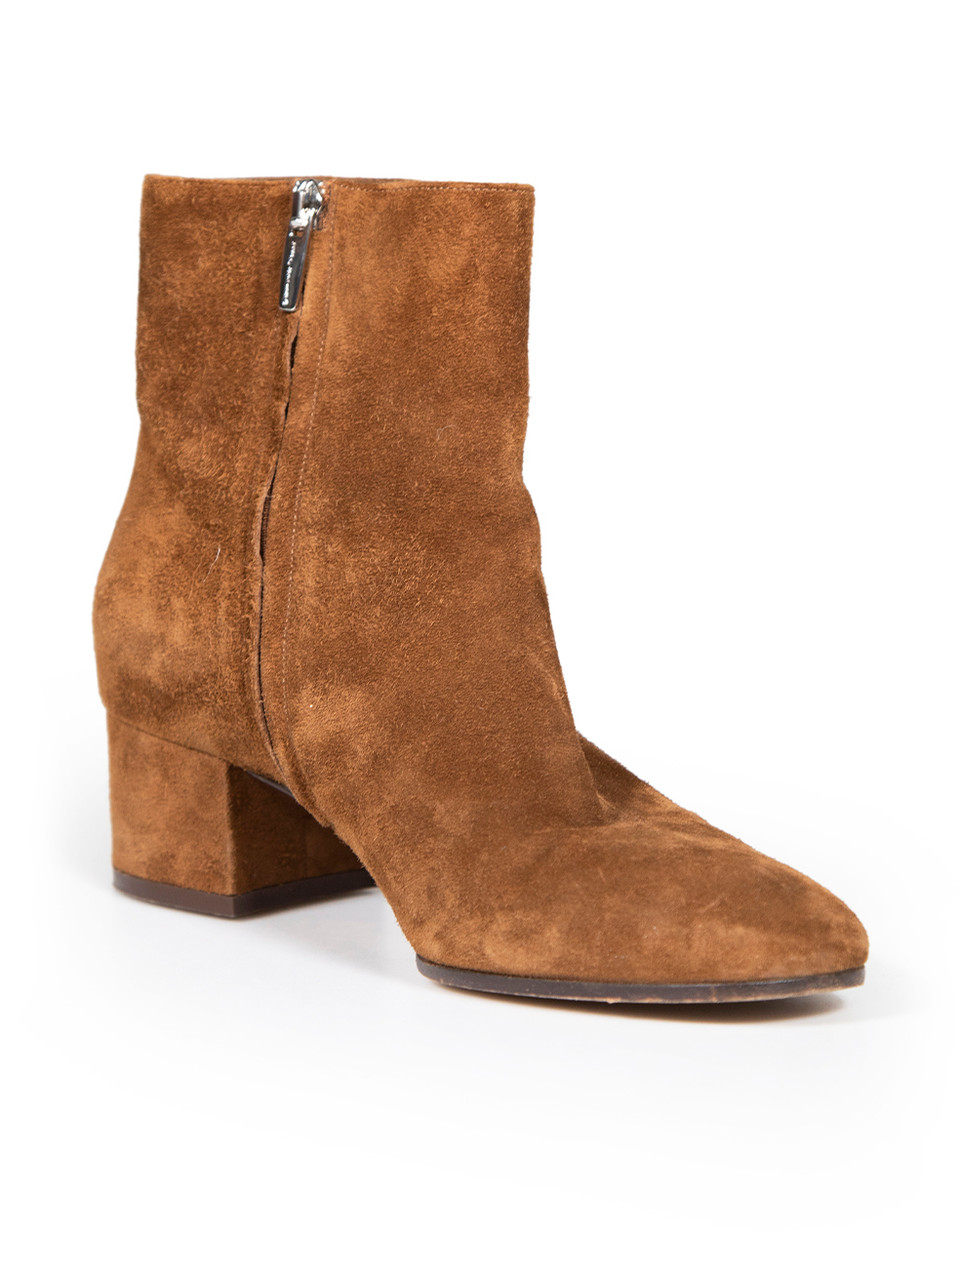 Gianvito Rossi Brown Suede Ankle Low Heel Boots